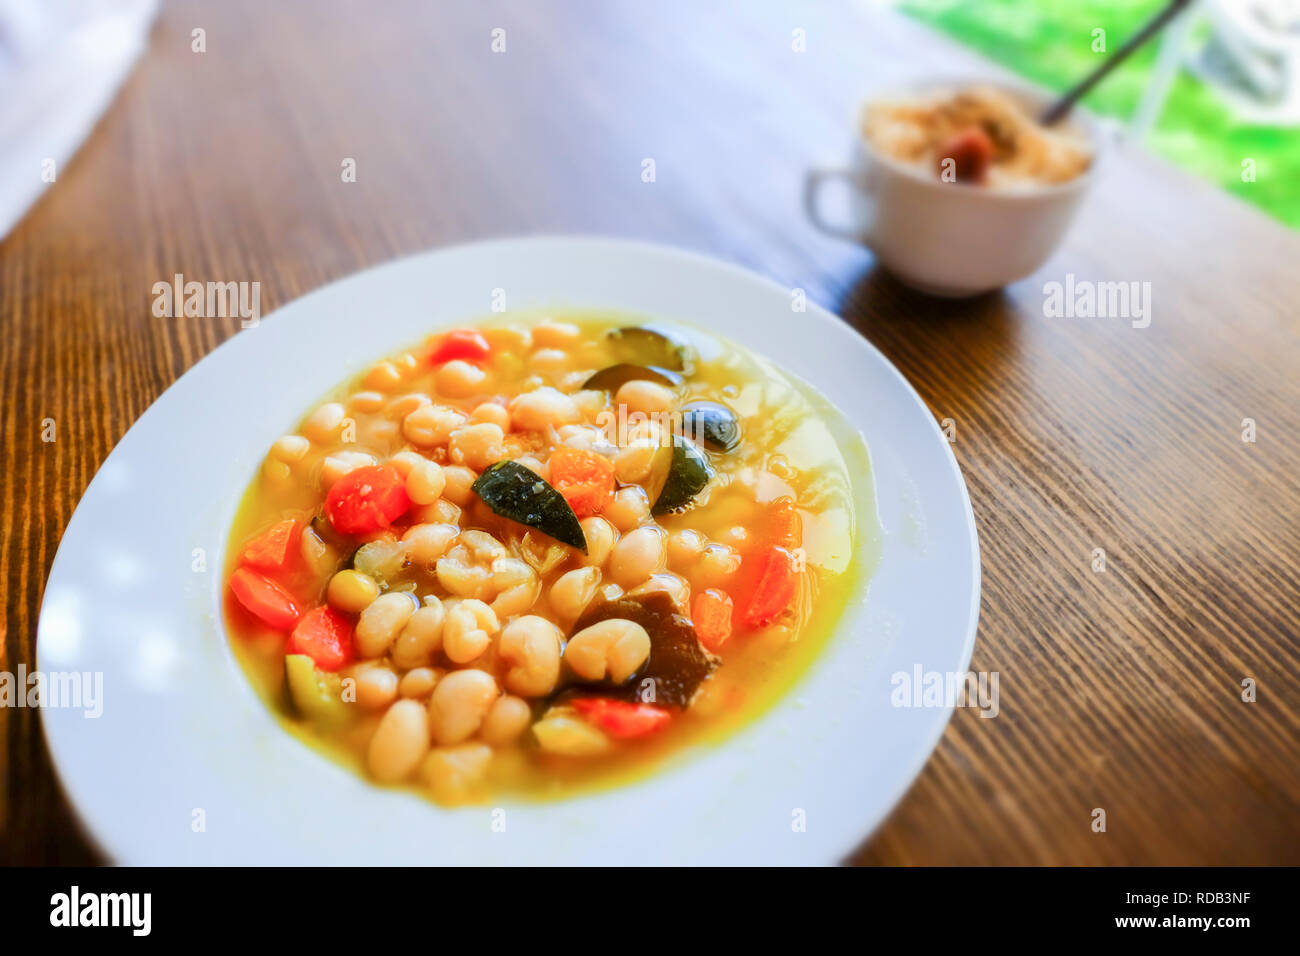 Pochas (Spanish string bean) with vegetables and kombu kelp (edible alga) and a cup of  brown rice with umeboshi (japanese pickled ume fruits). Macrob Stock Photo